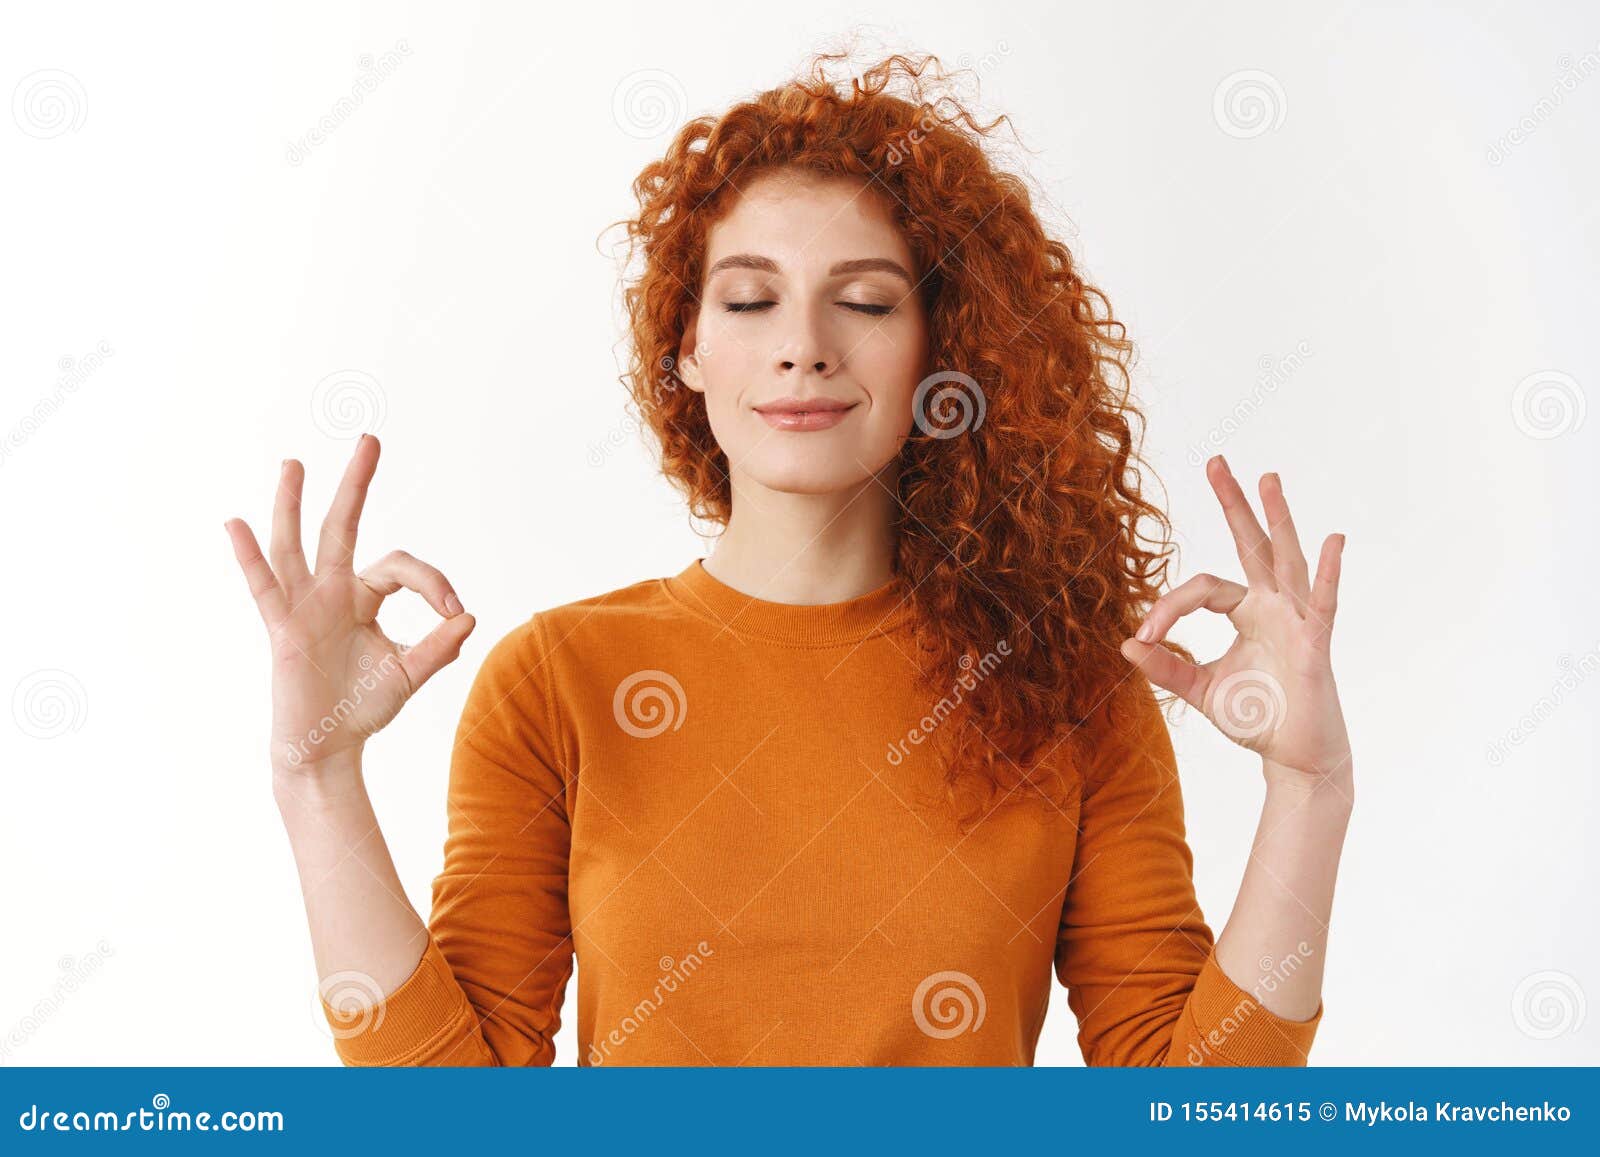 redhead girl calm down, soothing stress with yoga. relieved happy ginger woman peacefully meditating, making zen mudra